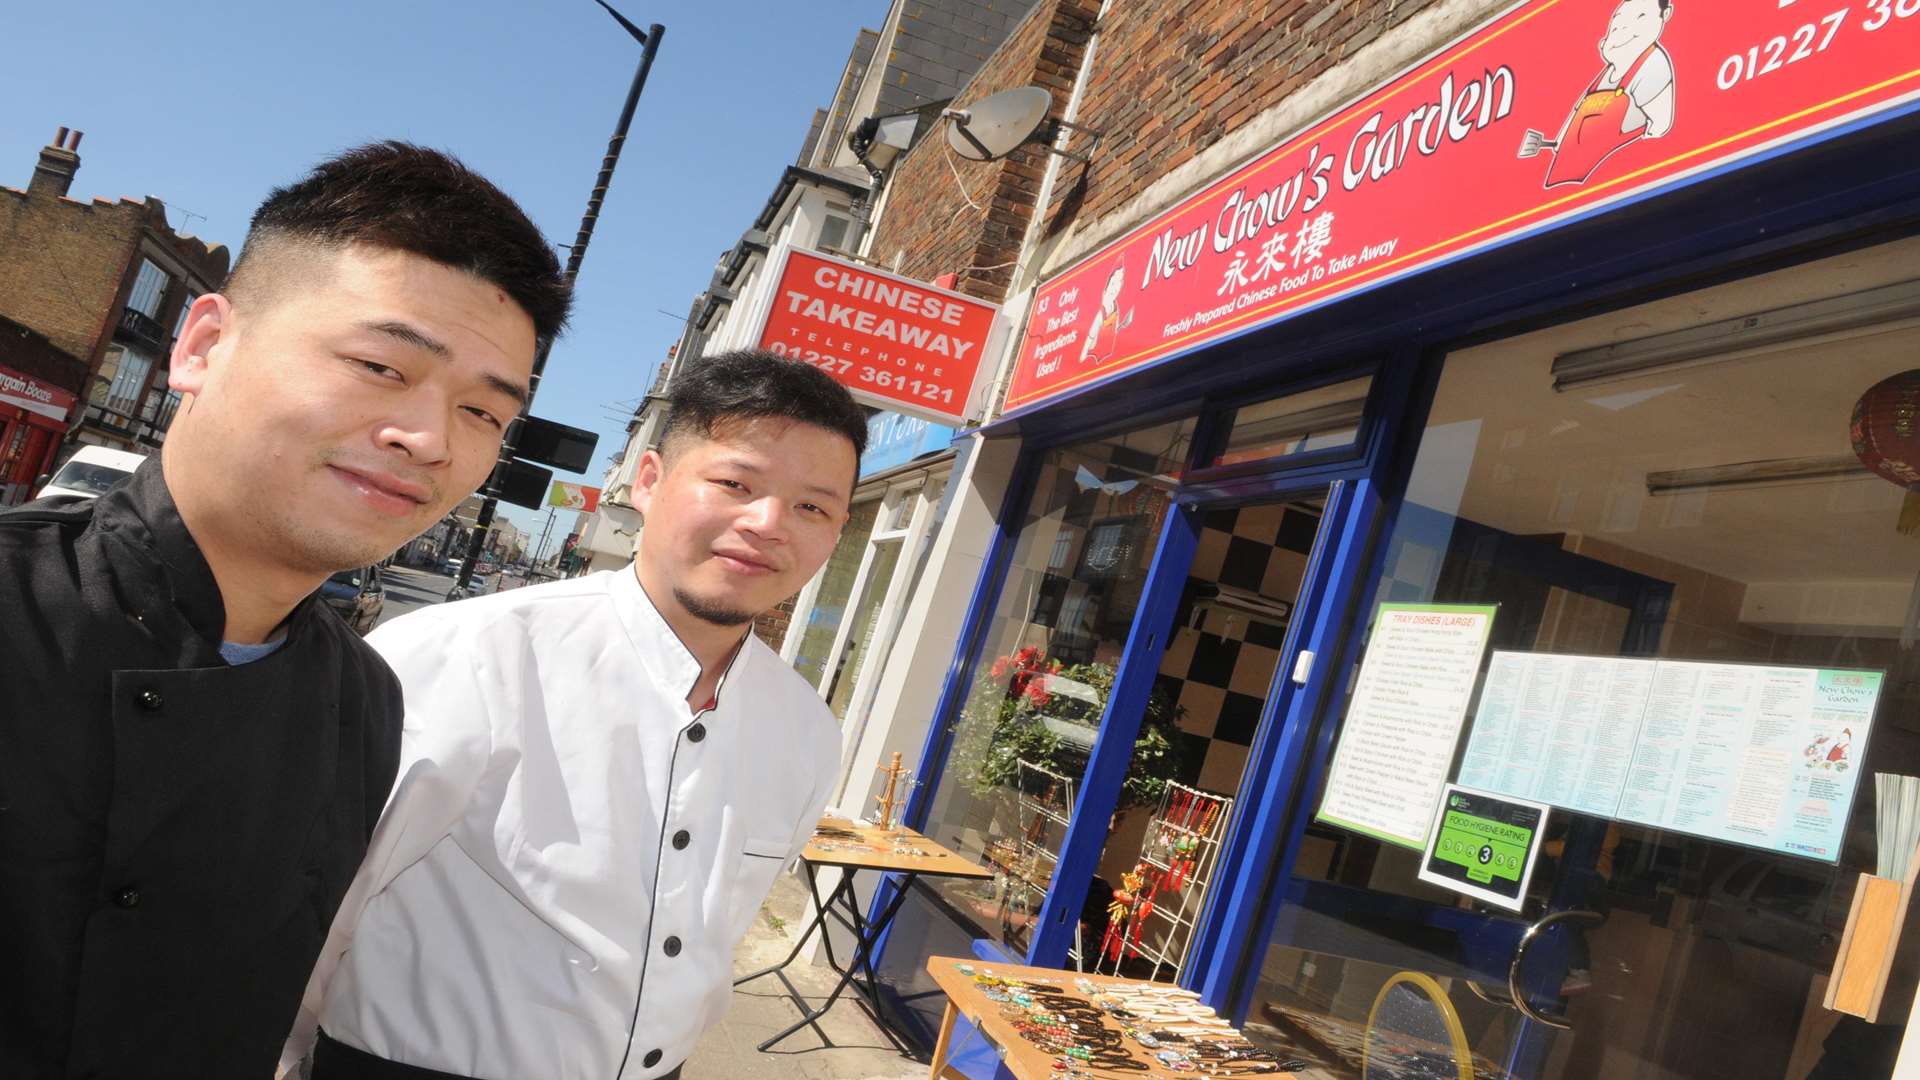 Hiu Liu and Jian Lin at New Chow's Garden, High Street, Herne Bay where they have a 3 out of 5 food hygiene rating (up from 1 out of 5).